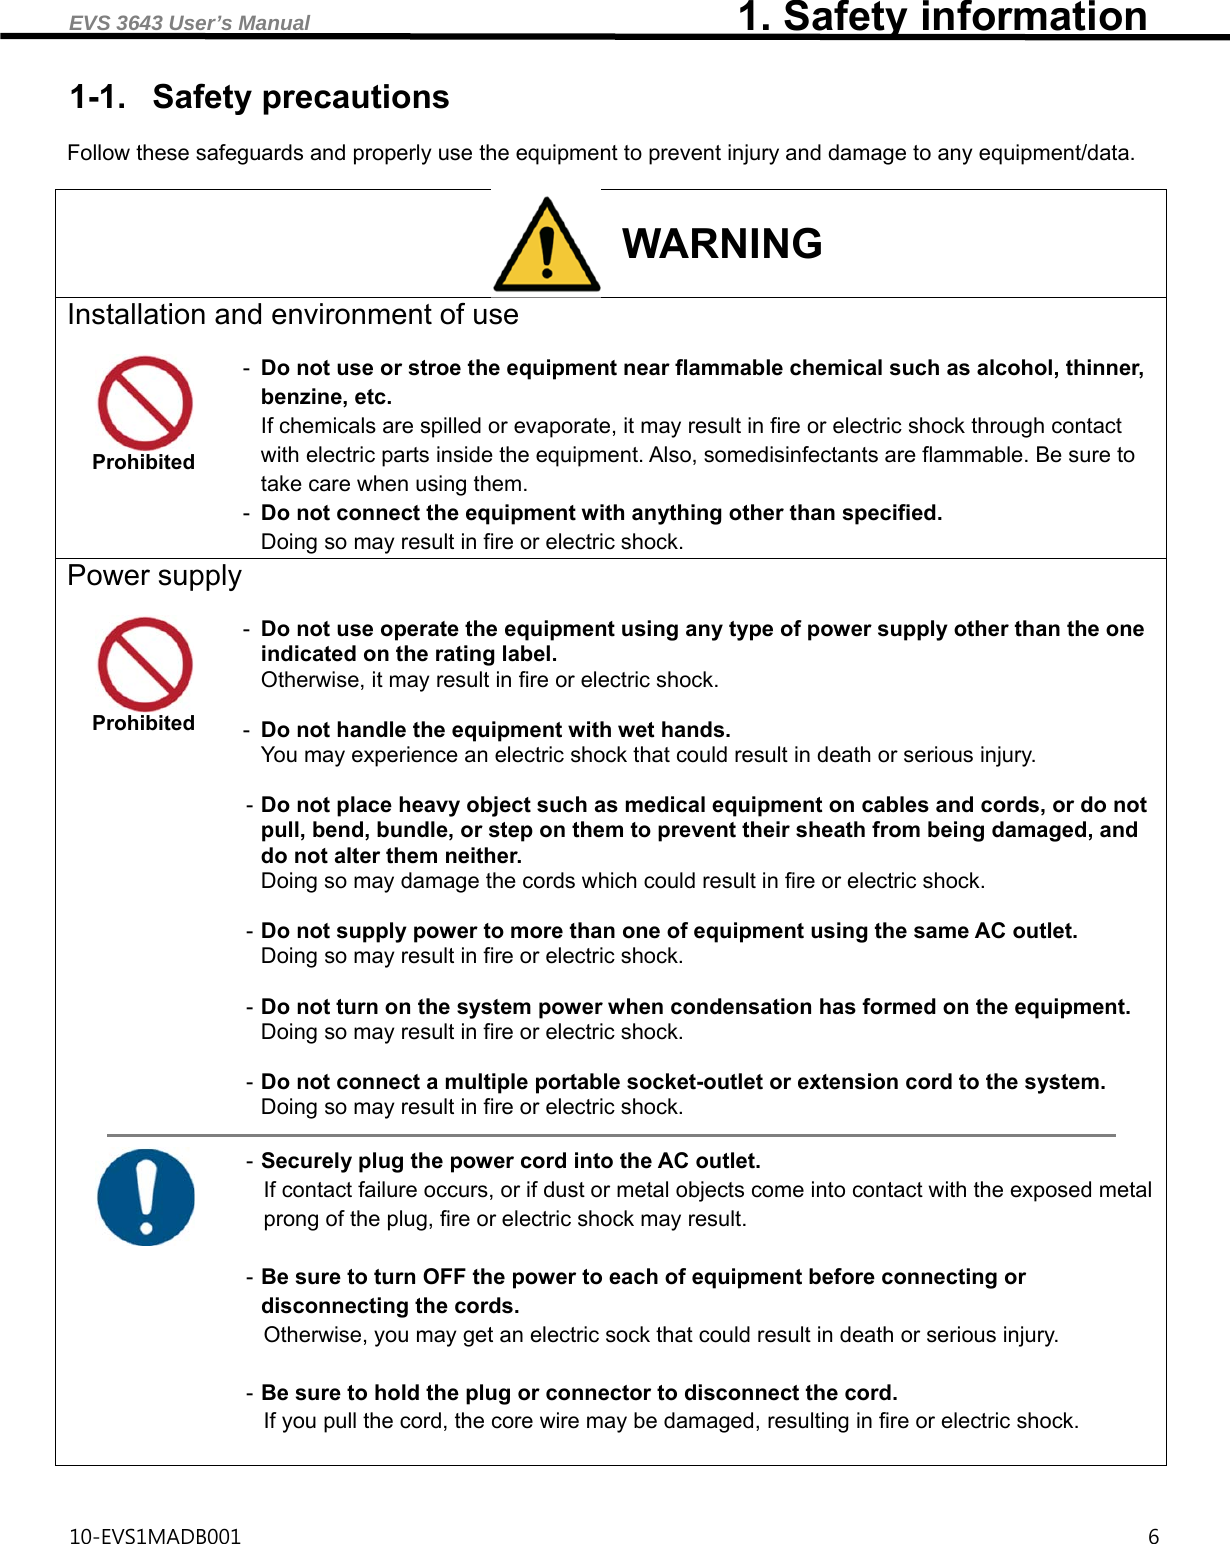 EVS 3643 User’s Manual                                         1. Safety information 10-EVS1MADB001                                                                                       6  1-1. Safety precautions  Follow these safeguards and properly use the equipment to prevent injury and damage to any equipment/data.  WARNING Installation and environment of use   Prohibited -  Do not use or stroe the equipment near flammable chemical such as alcohol, thinner, benzine, etc. If chemicals are spilled or evaporate, it may result in fire or electric shock through contact with electric parts inside the equipment. Also, somedisinfectants are flammable. Be sure to take care when using them. -  Do not connect the equipment with anything other than specified. Doing so may result in fire or electric shock. Power supply   Prohibited -  Do not use operate the equipment using any type of power supply other than the one indicated on the rating label. Otherwise, it may result in fire or electric shock.  -  Do not handle the equipment with wet hands. You may experience an electric shock that could result in death or serious injury.  - Do not place heavy object such as medical equipment on cables and cords, or do not pull, bend, bundle, or step on them to prevent their sheath from being damaged, and do not alter them neither. Doing so may damage the cords which could result in fire or electric shock.  - Do not supply power to more than one of equipment using the same AC outlet. Doing so may result in fire or electric shock.  - Do not turn on the system power when condensation has formed on the equipment. Doing so may result in fire or electric shock.  - Do not connect a multiple portable socket-outlet or extension cord to the system. Doing so may result in fire or electric shock.   - Securely plug the power cord into the AC outlet. If contact failure occurs, or if dust or metal objects come into contact with the exposed metal prong of the plug, fire or electric shock may result.  - Be sure to turn OFF the power to each of equipment before connecting or disconnecting the cords. Otherwise, you may get an electric sock that could result in death or serious injury.  - Be sure to hold the plug or connector to disconnect the cord. If you pull the cord, the core wire may be damaged, resulting in fire or electric shock.    